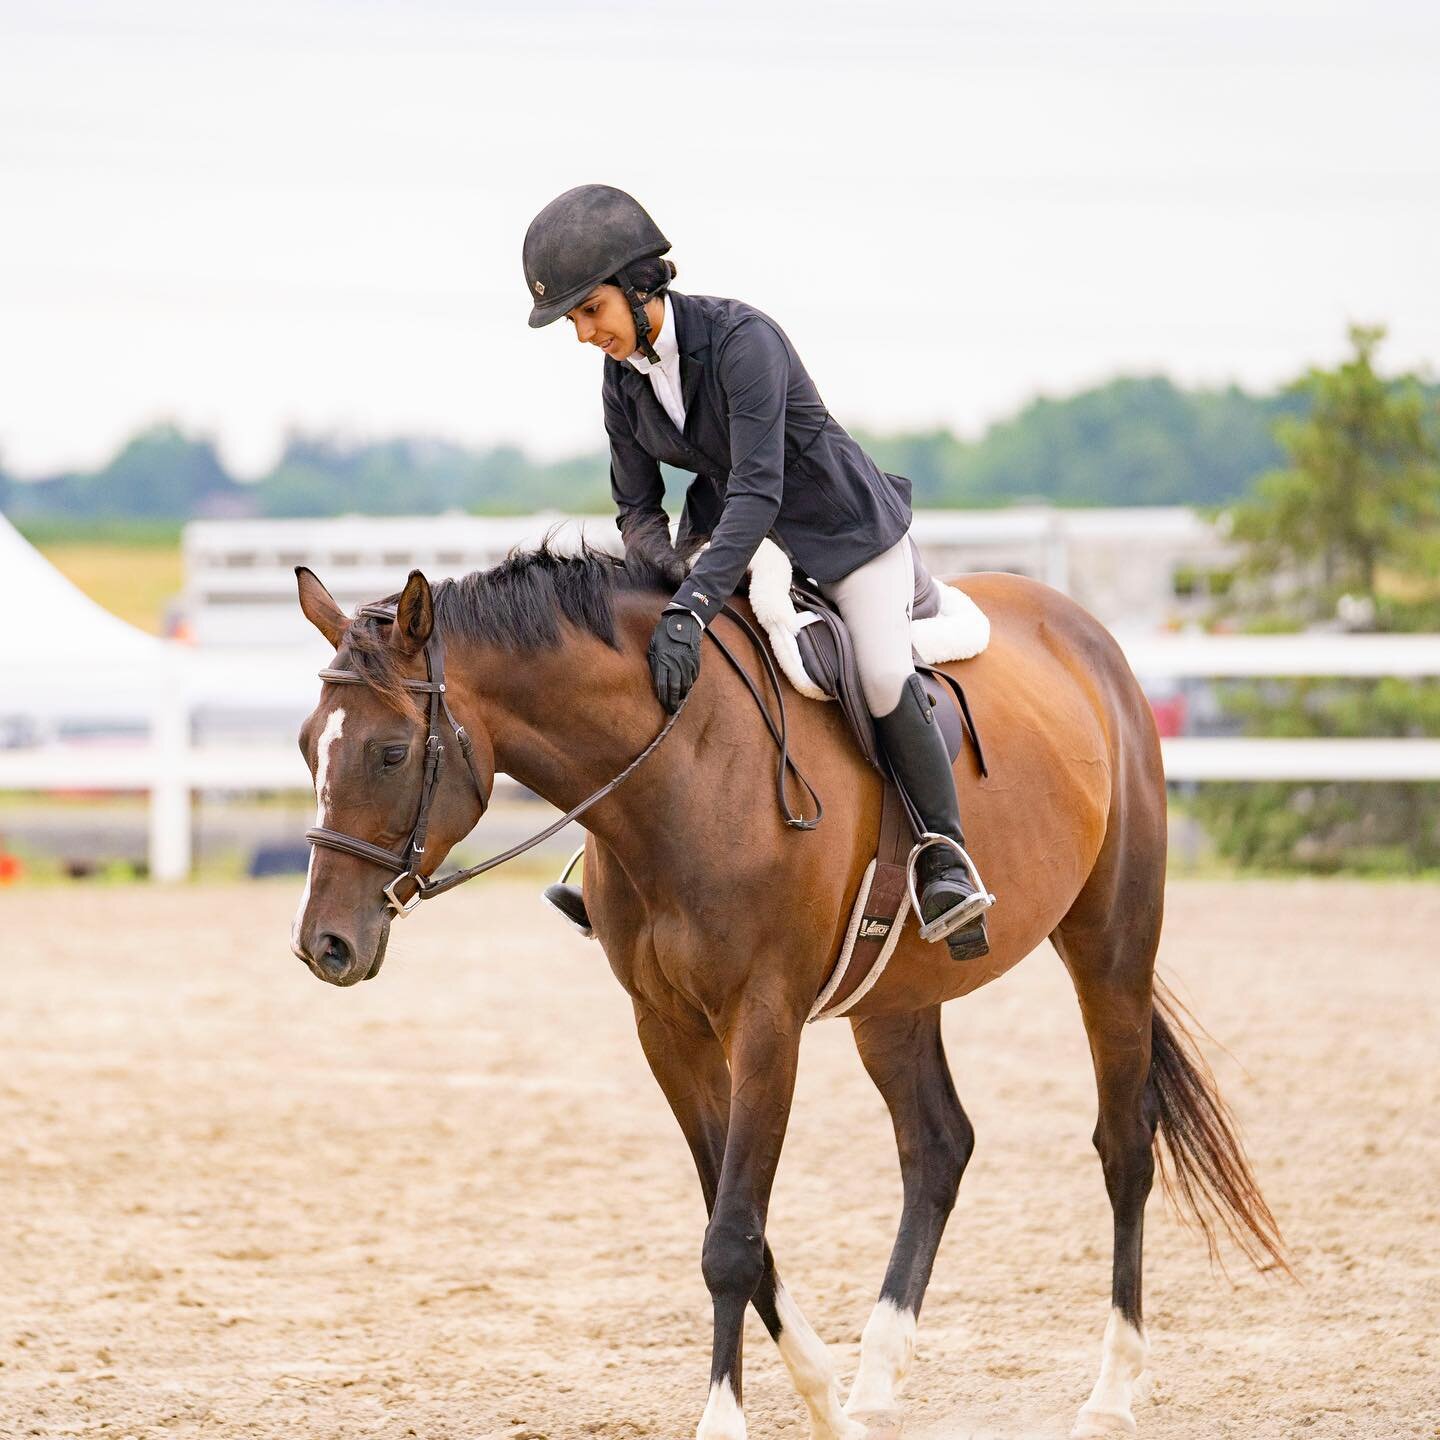 We are so excited to be attending the Ancaster Saddle Club horse show this Sunday as the official photographer again 🤩 If you would like pictures taken of you and your horse, send me a message with your number and division so I can get as many photo